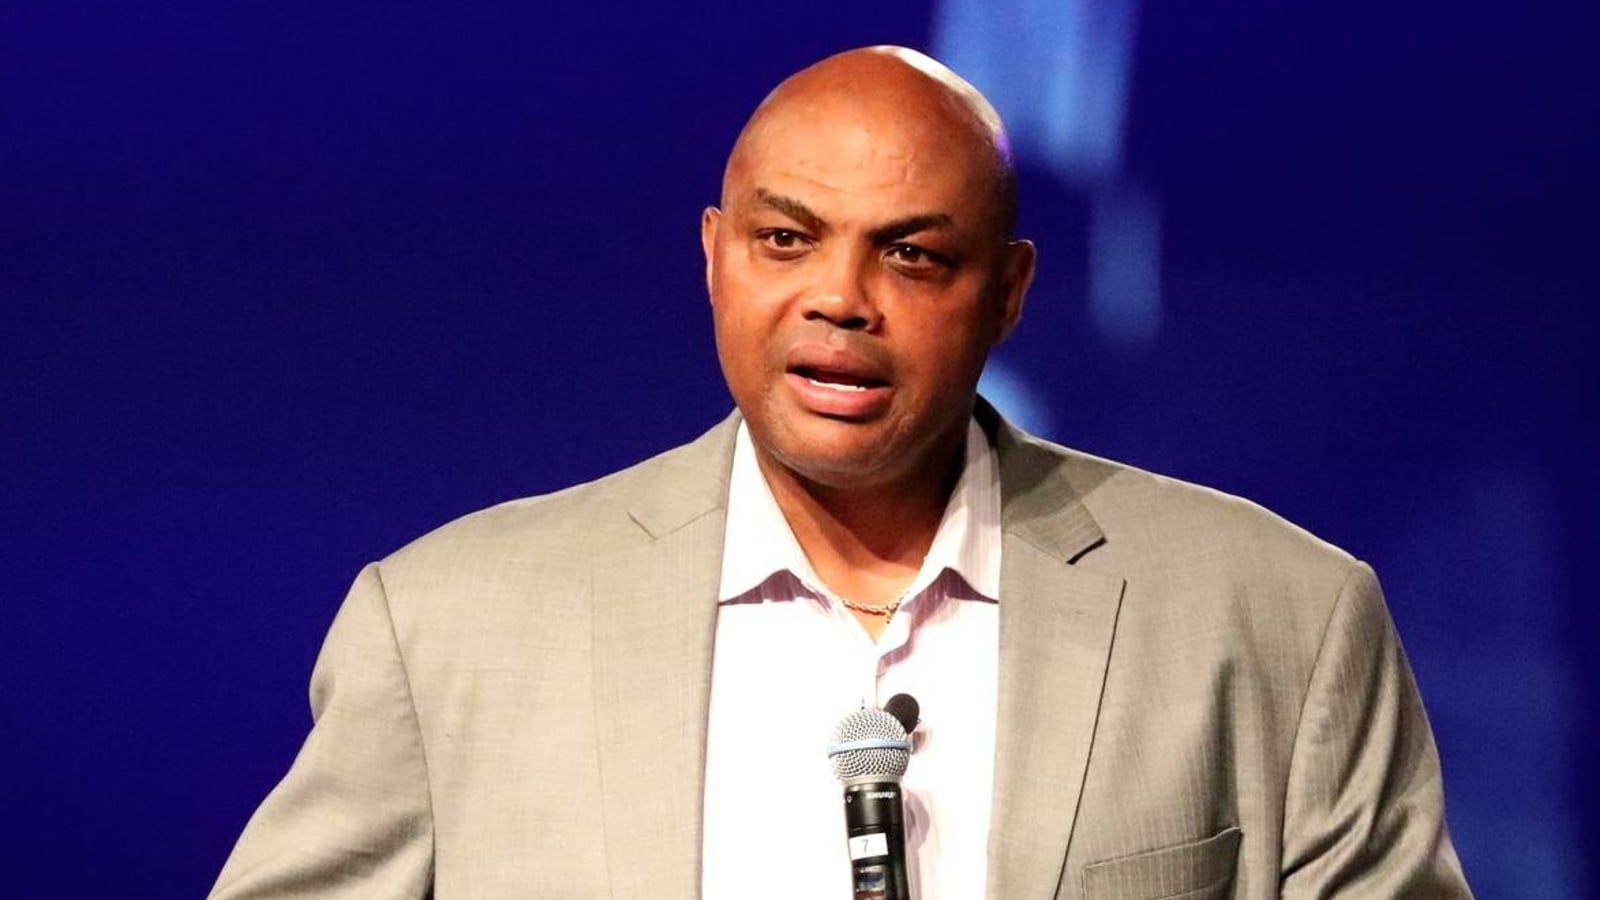 Watch: Charles Barkley shares why he’ll never bet against Tom Brady